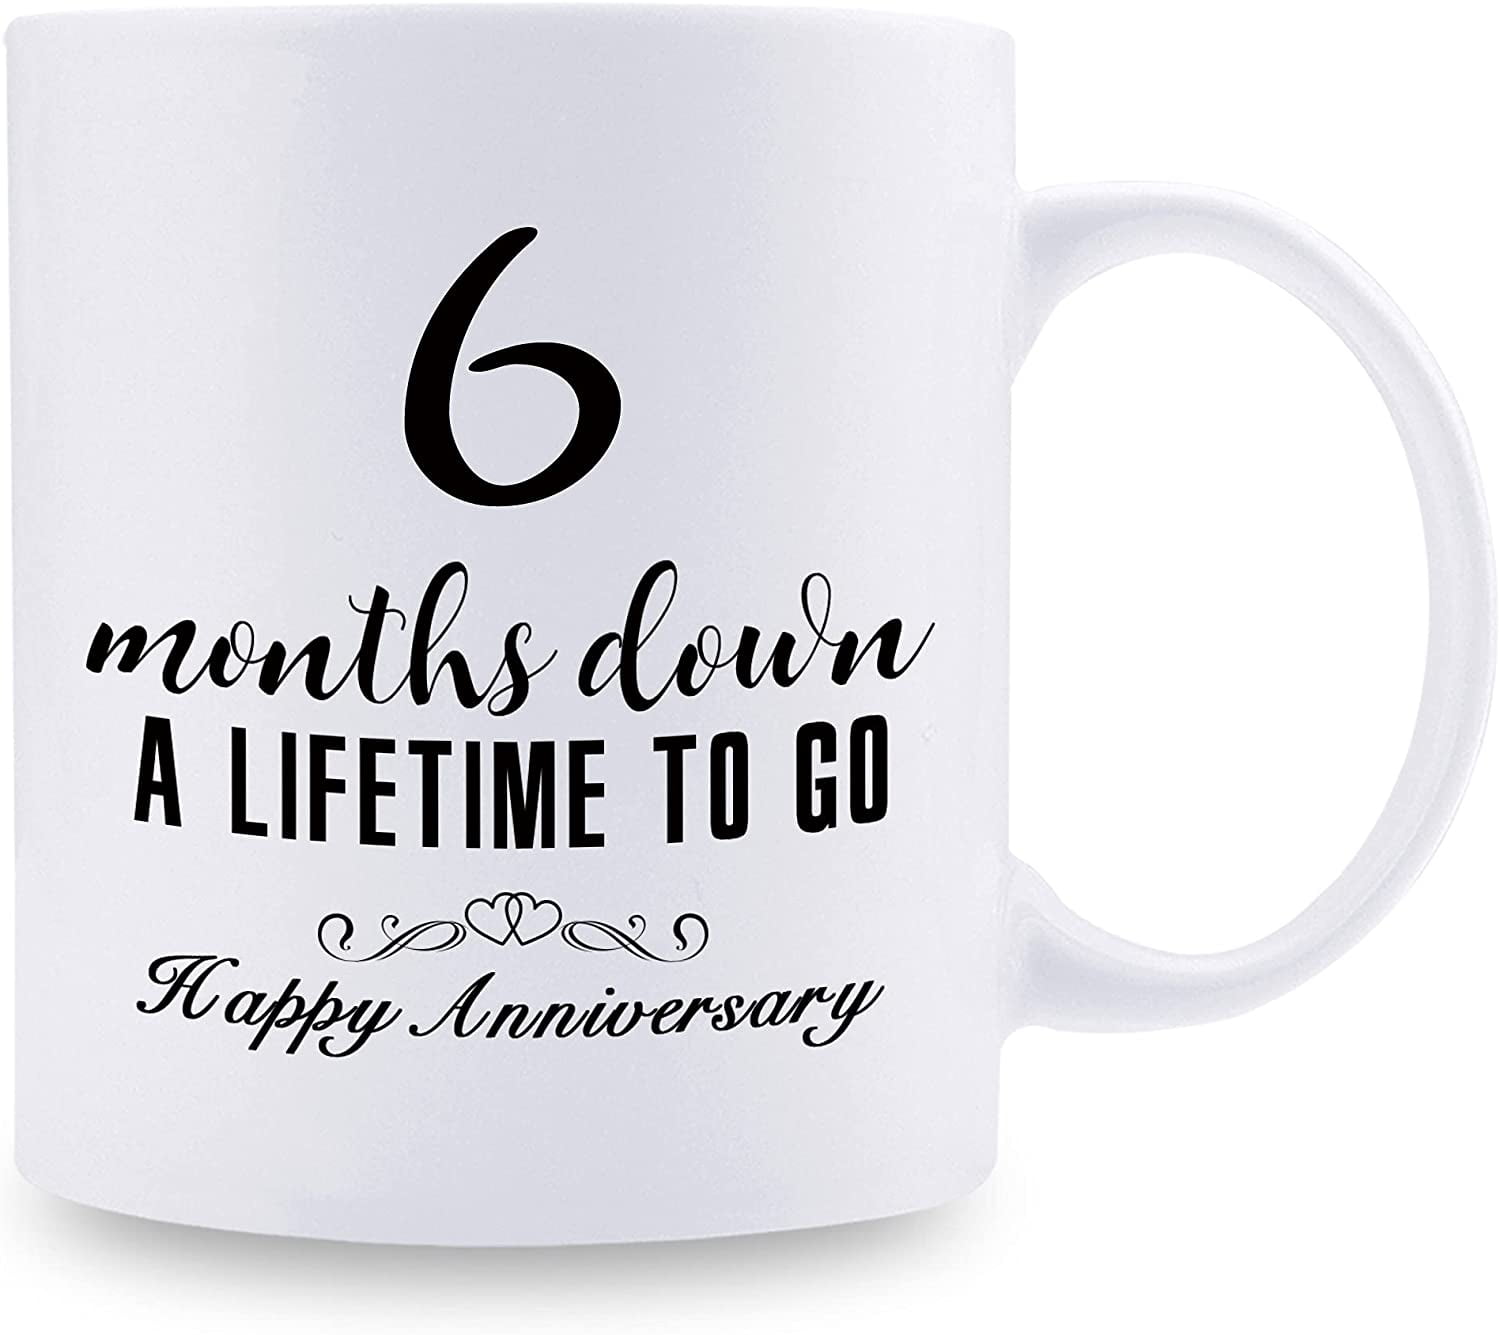 FITWICK 1 Year Anniversary Mug Gifts for Boyfriends Girlfriends with Card, One Year Dating Anniversary Mug Gift for Her Him, 1st Girlfriend